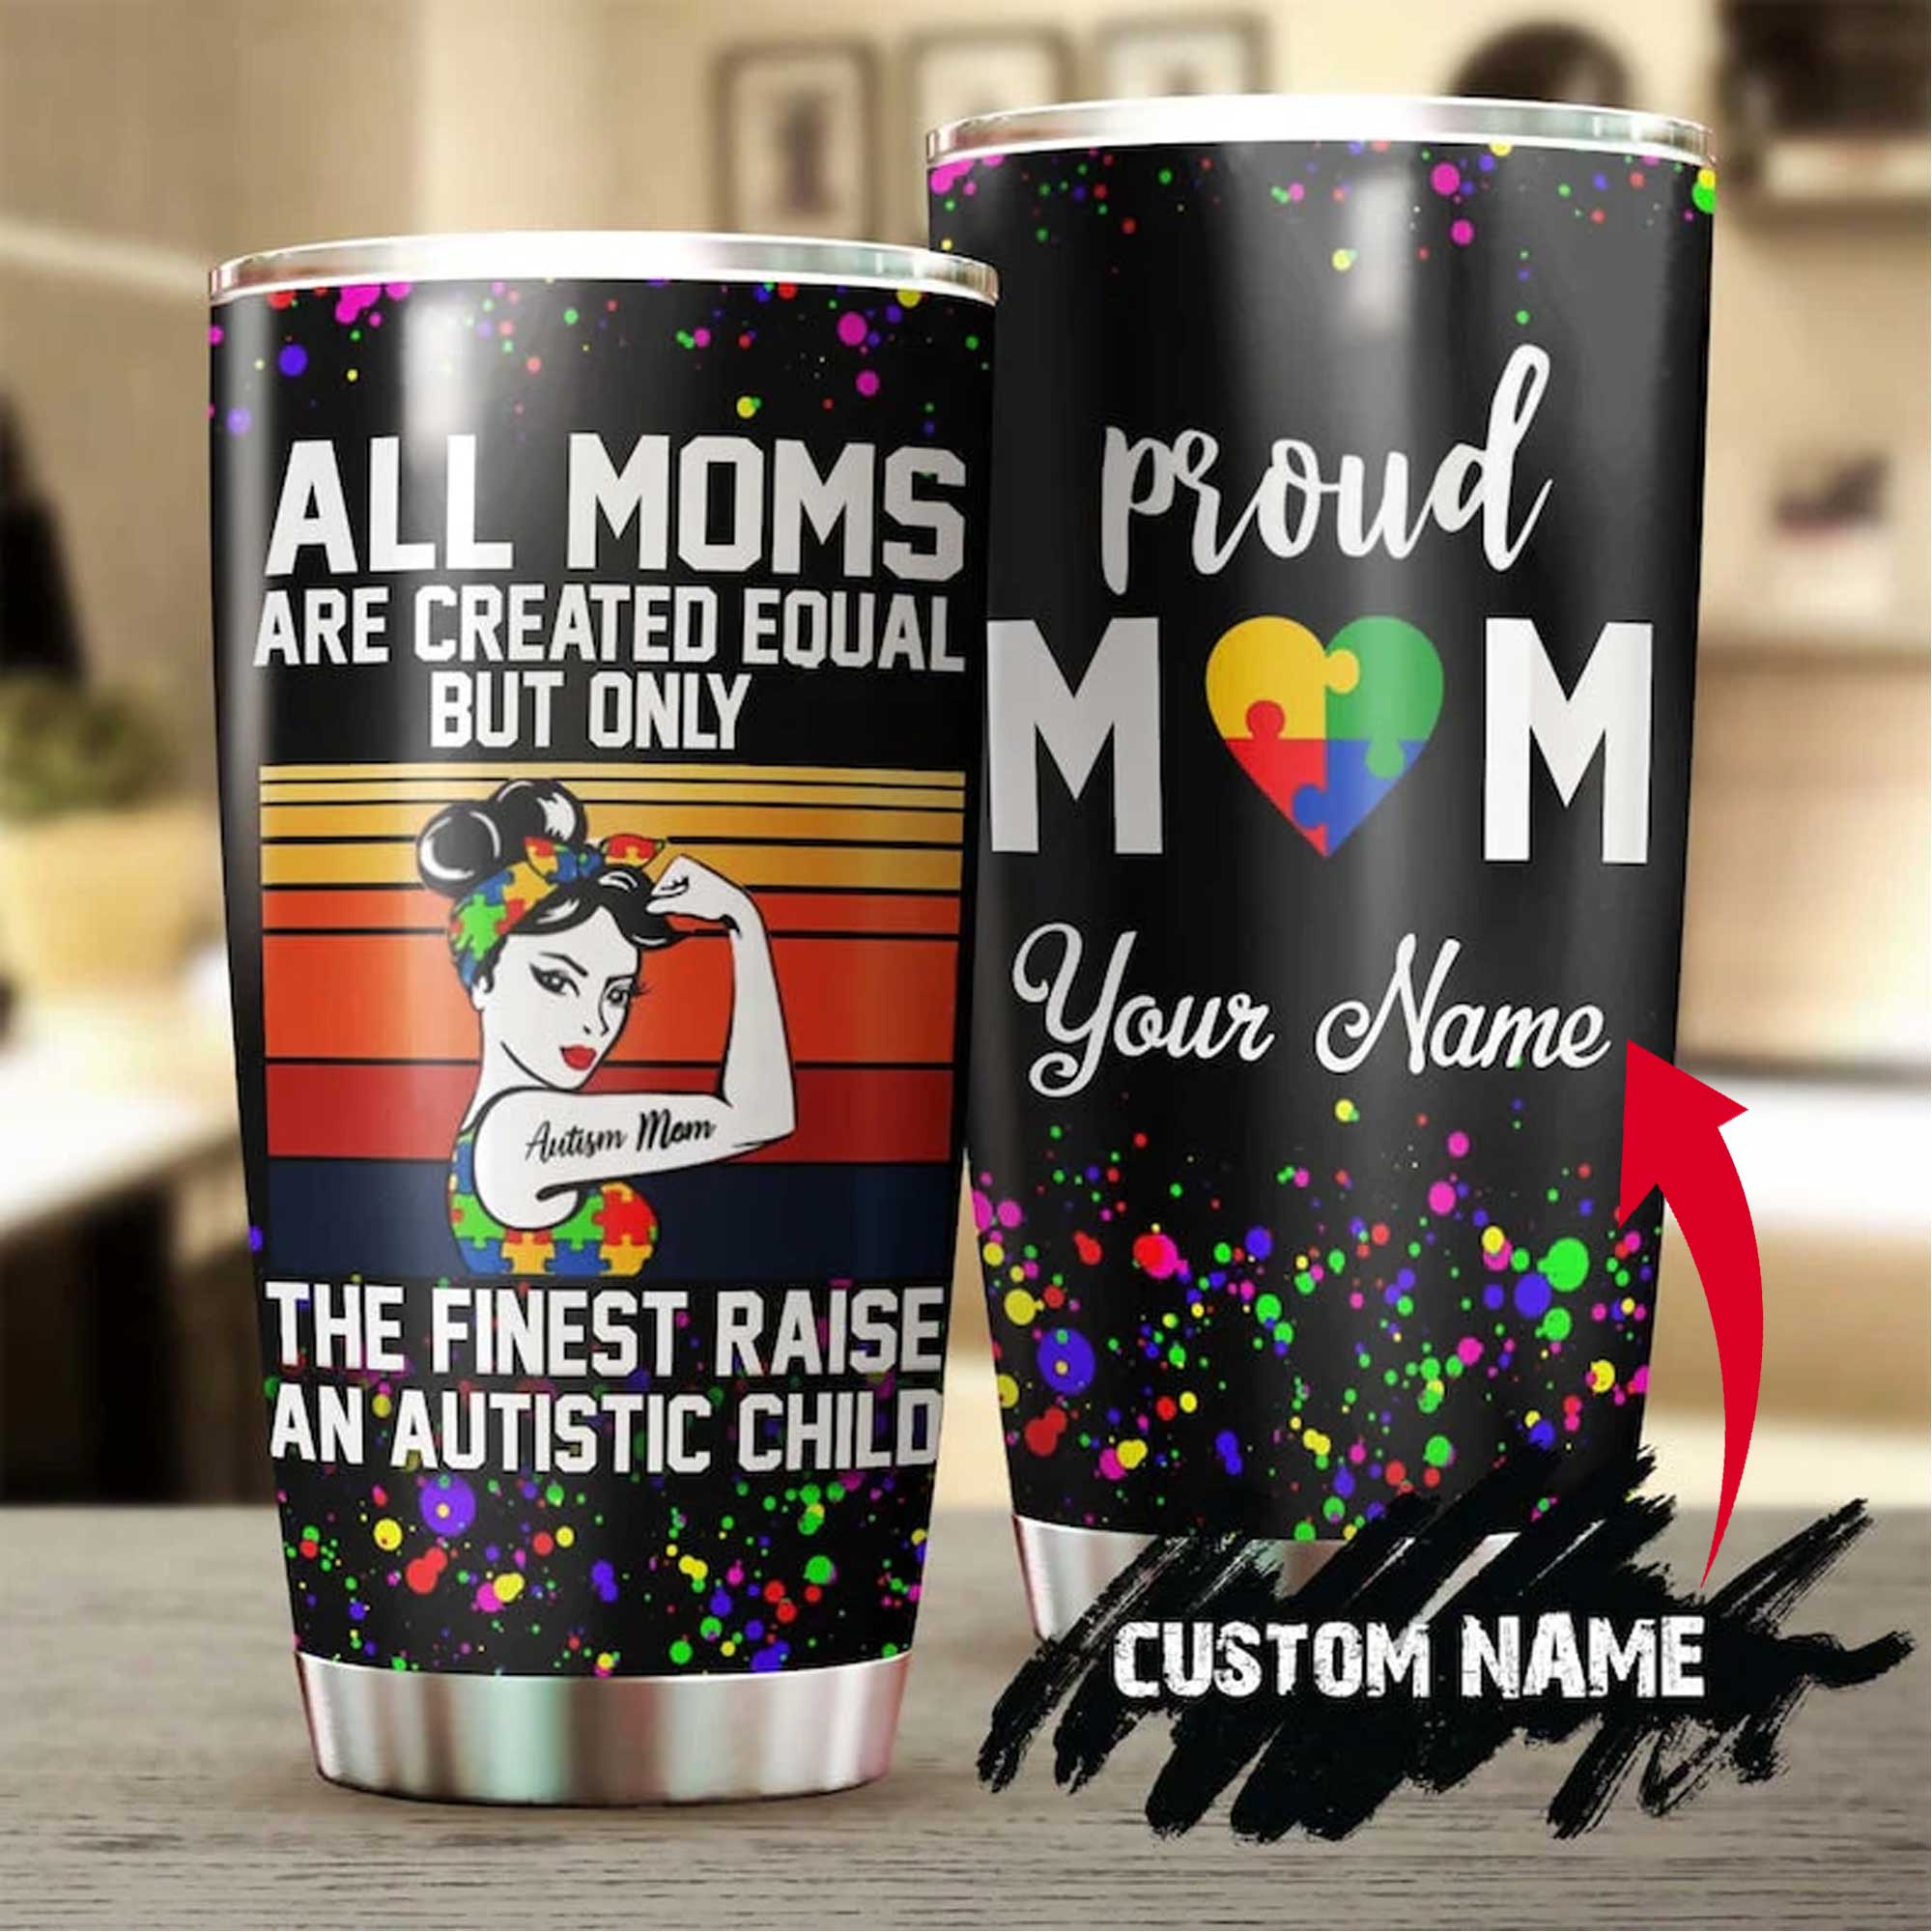 Personalized Mother's Day Gift Tumbler - Custom Gift For Mother's Day, Presents for Mom - Autism Tumbler- The Finest Mom Raise Autistic Child Tumbler